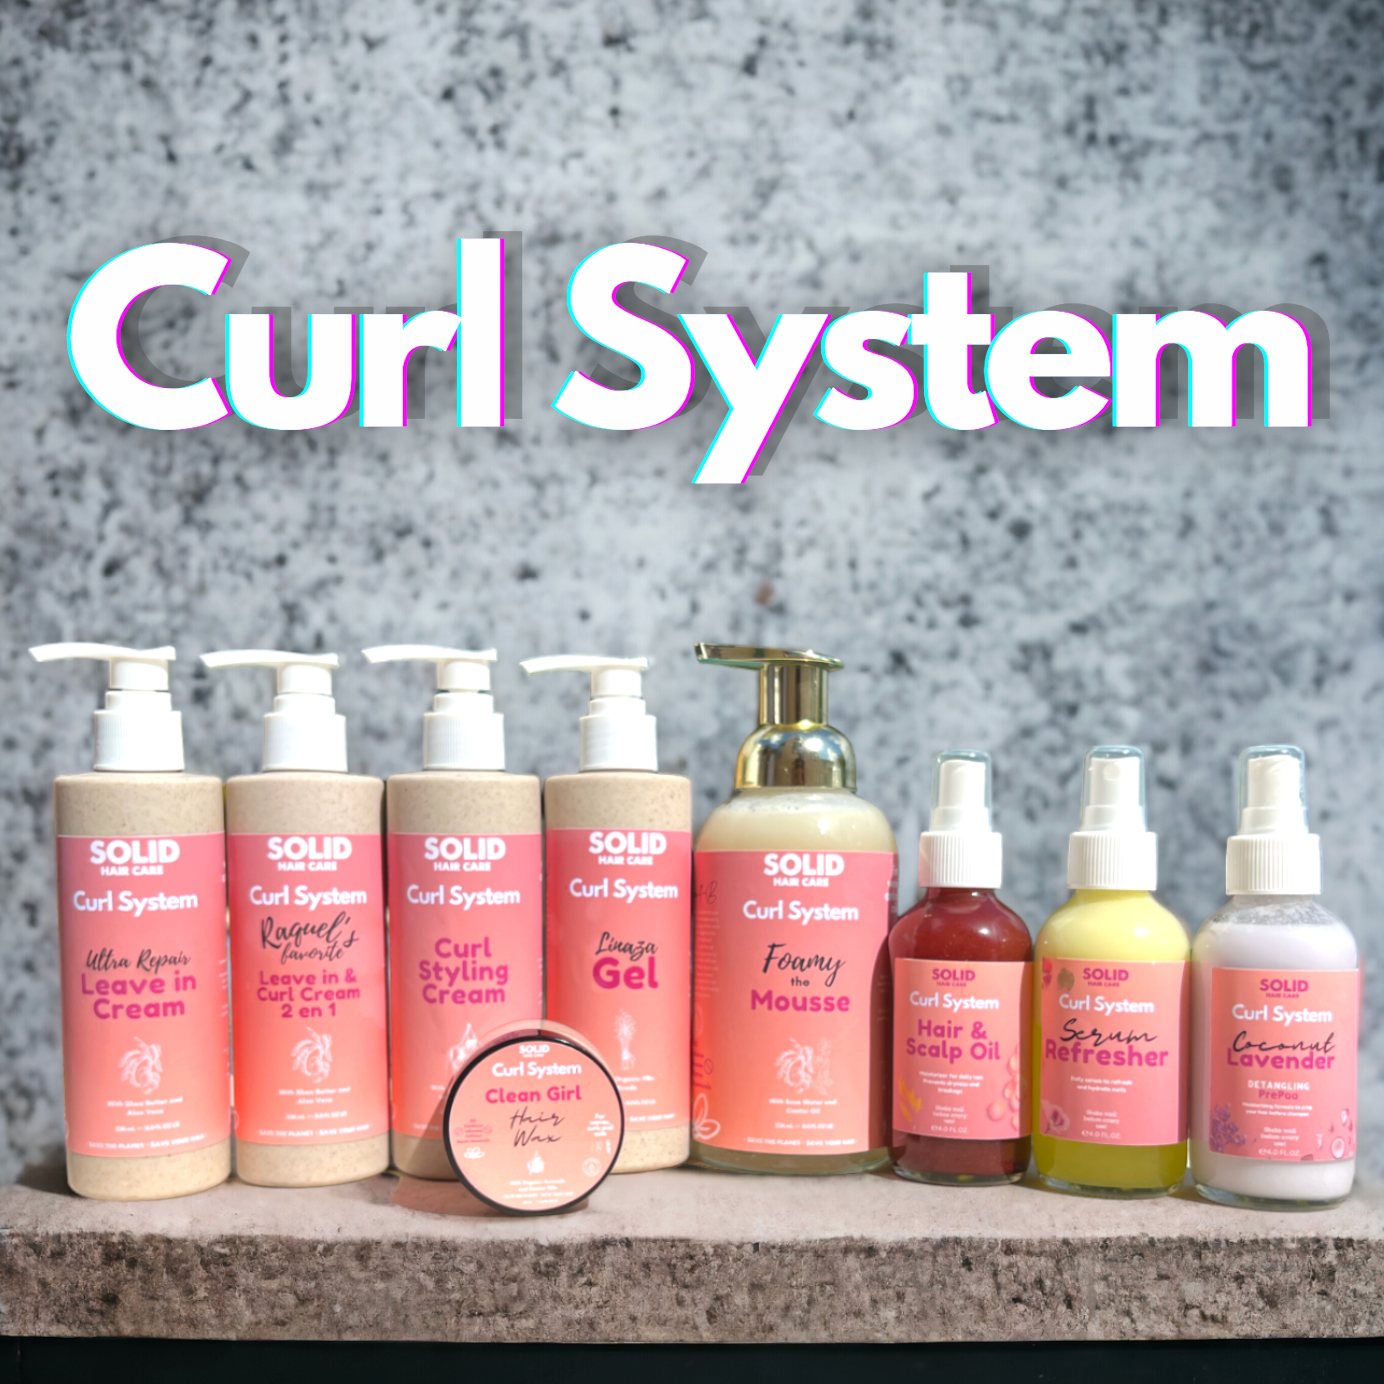 The Curl System